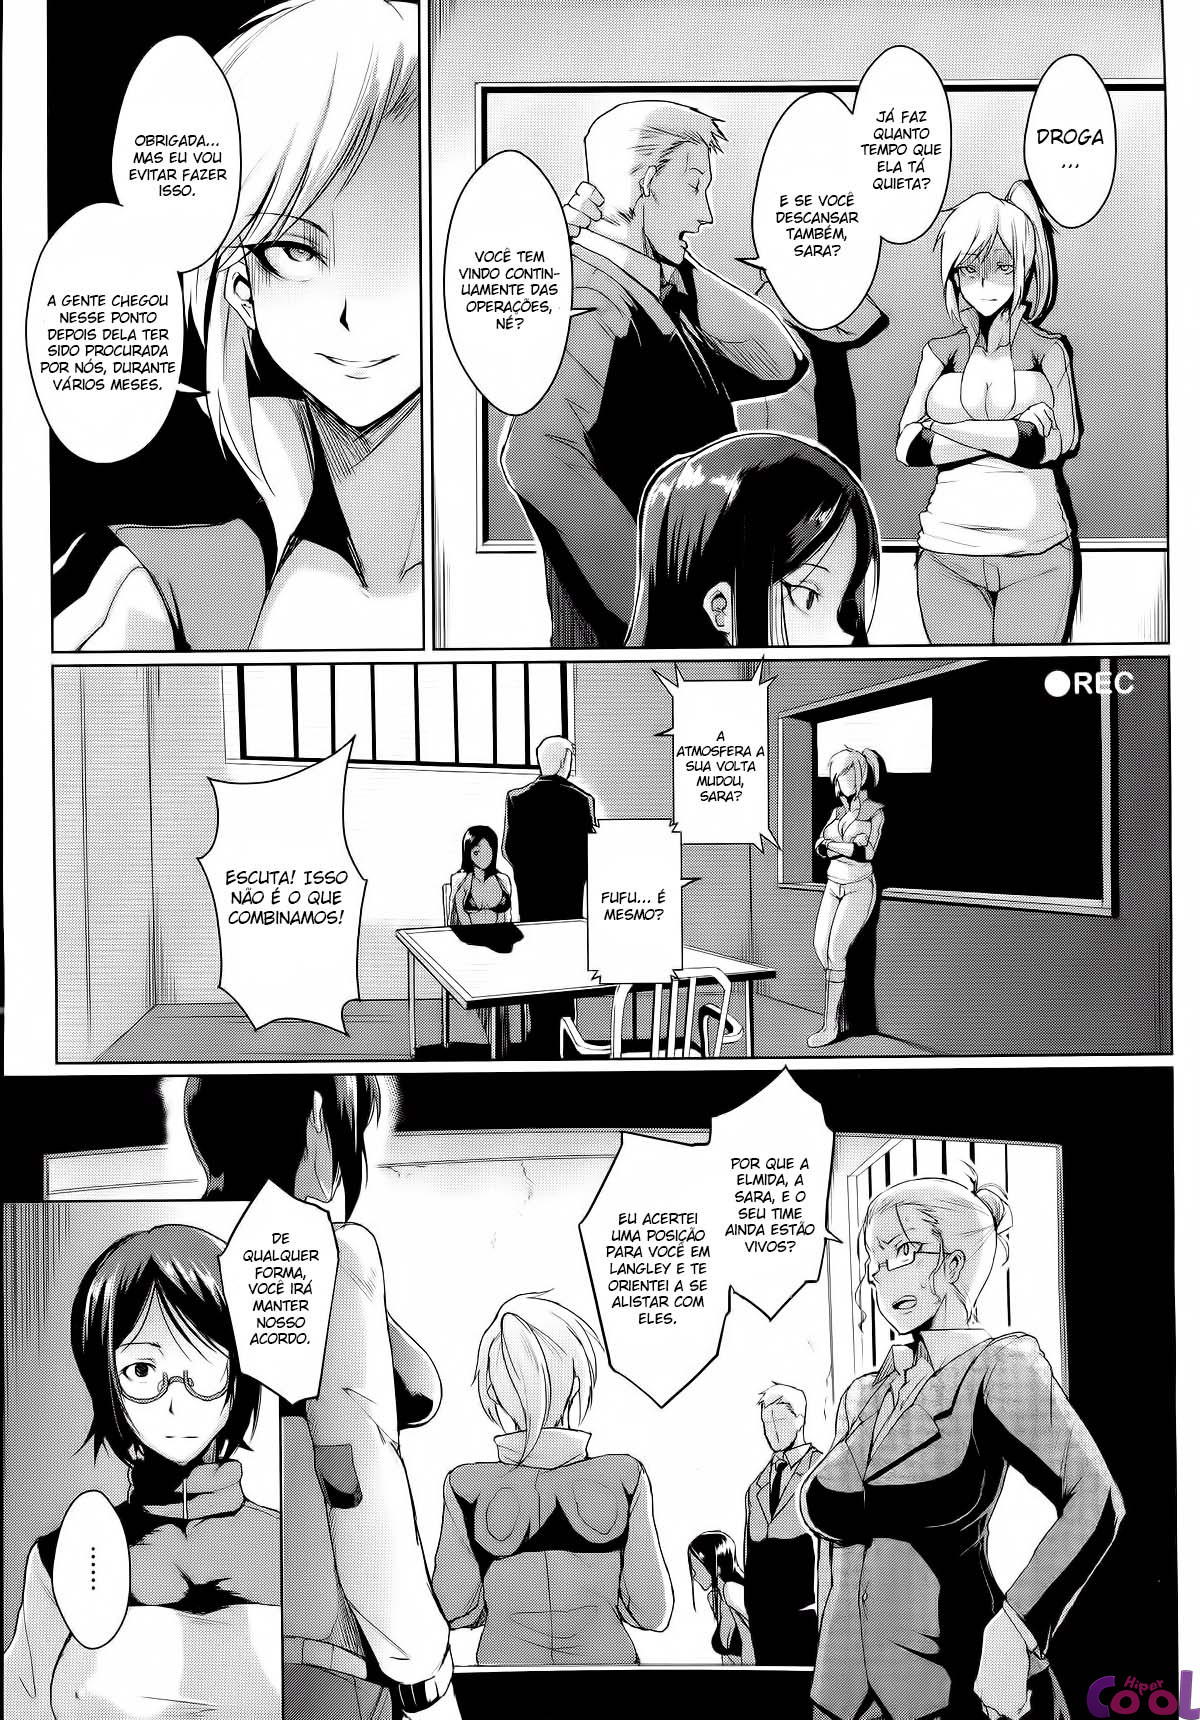 the-voodoo-squad-kouhen-chapter-01-page-03.jpg